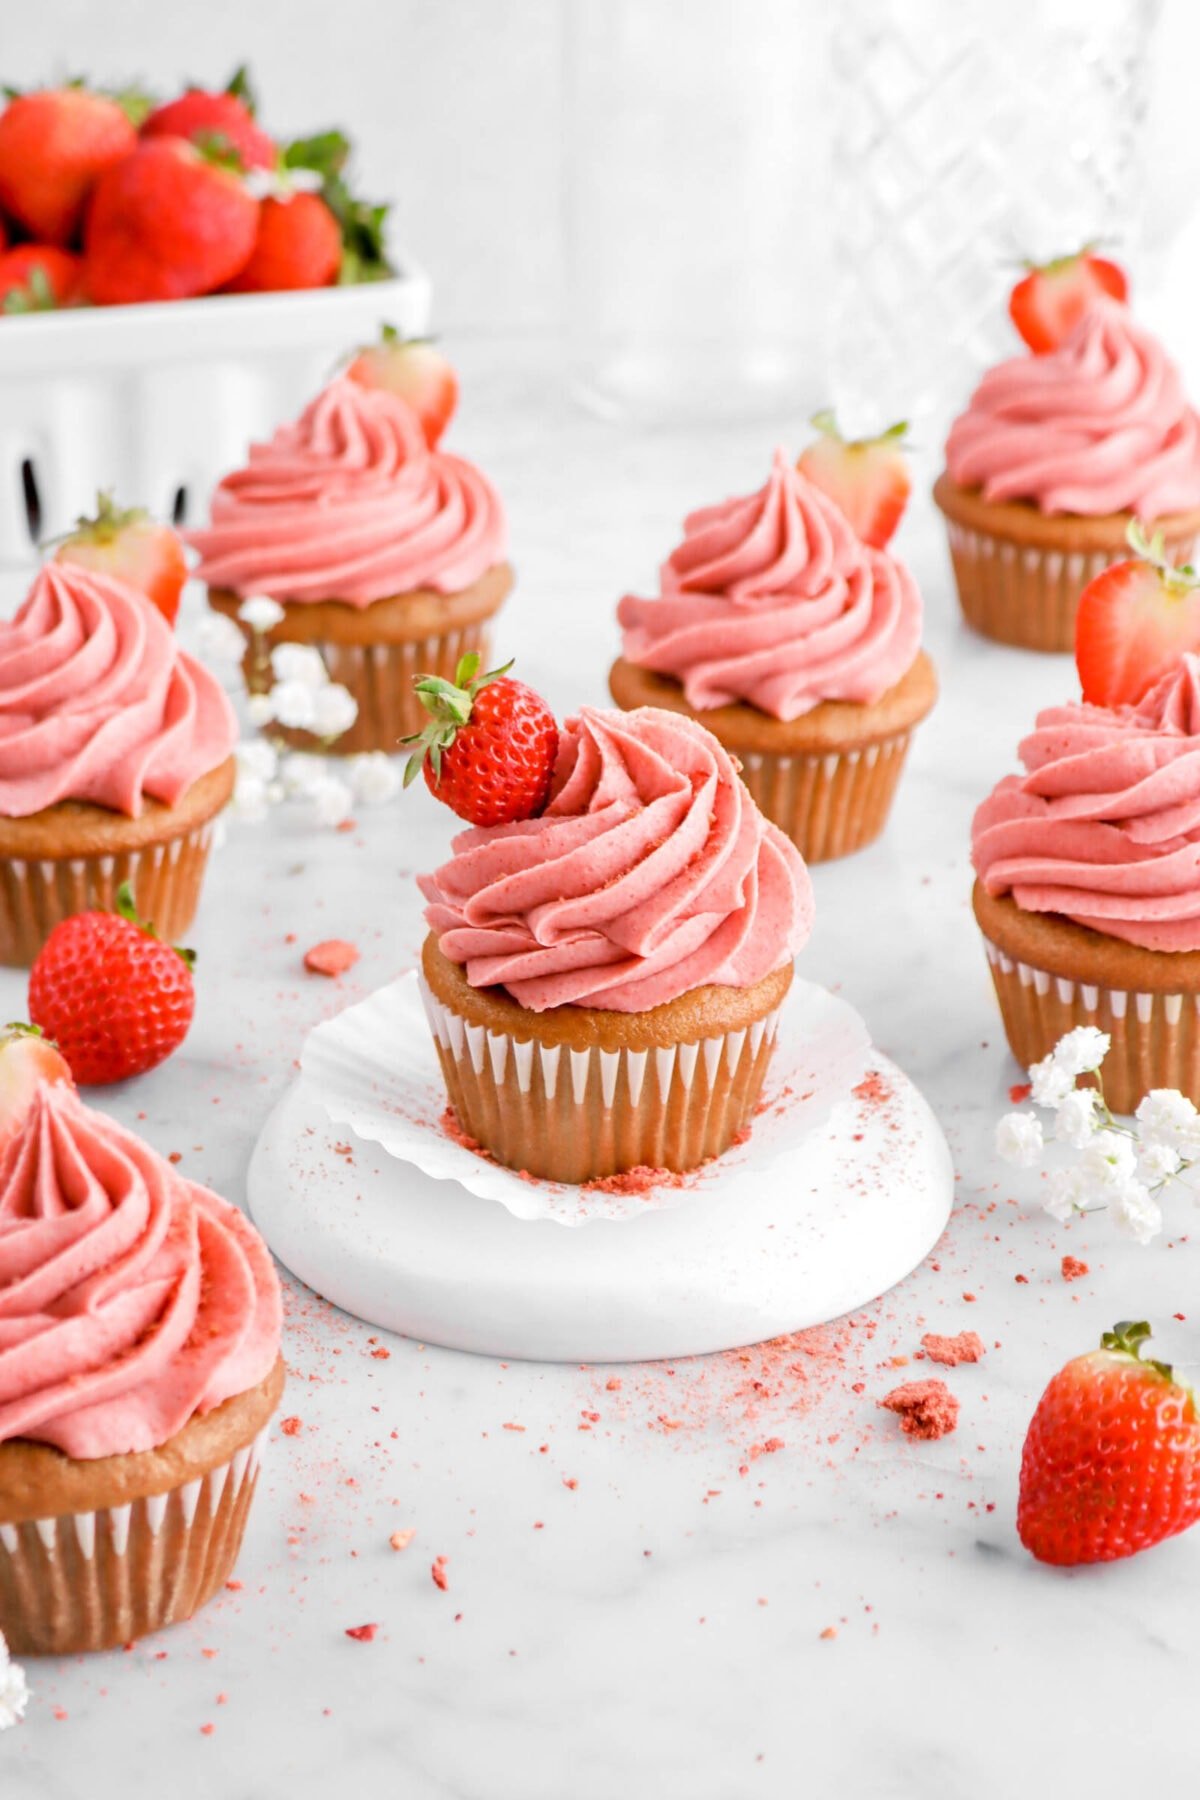 seven strawberry cupcakes with fresh strawberries and white flowers around, with a basket of strawberries behind.